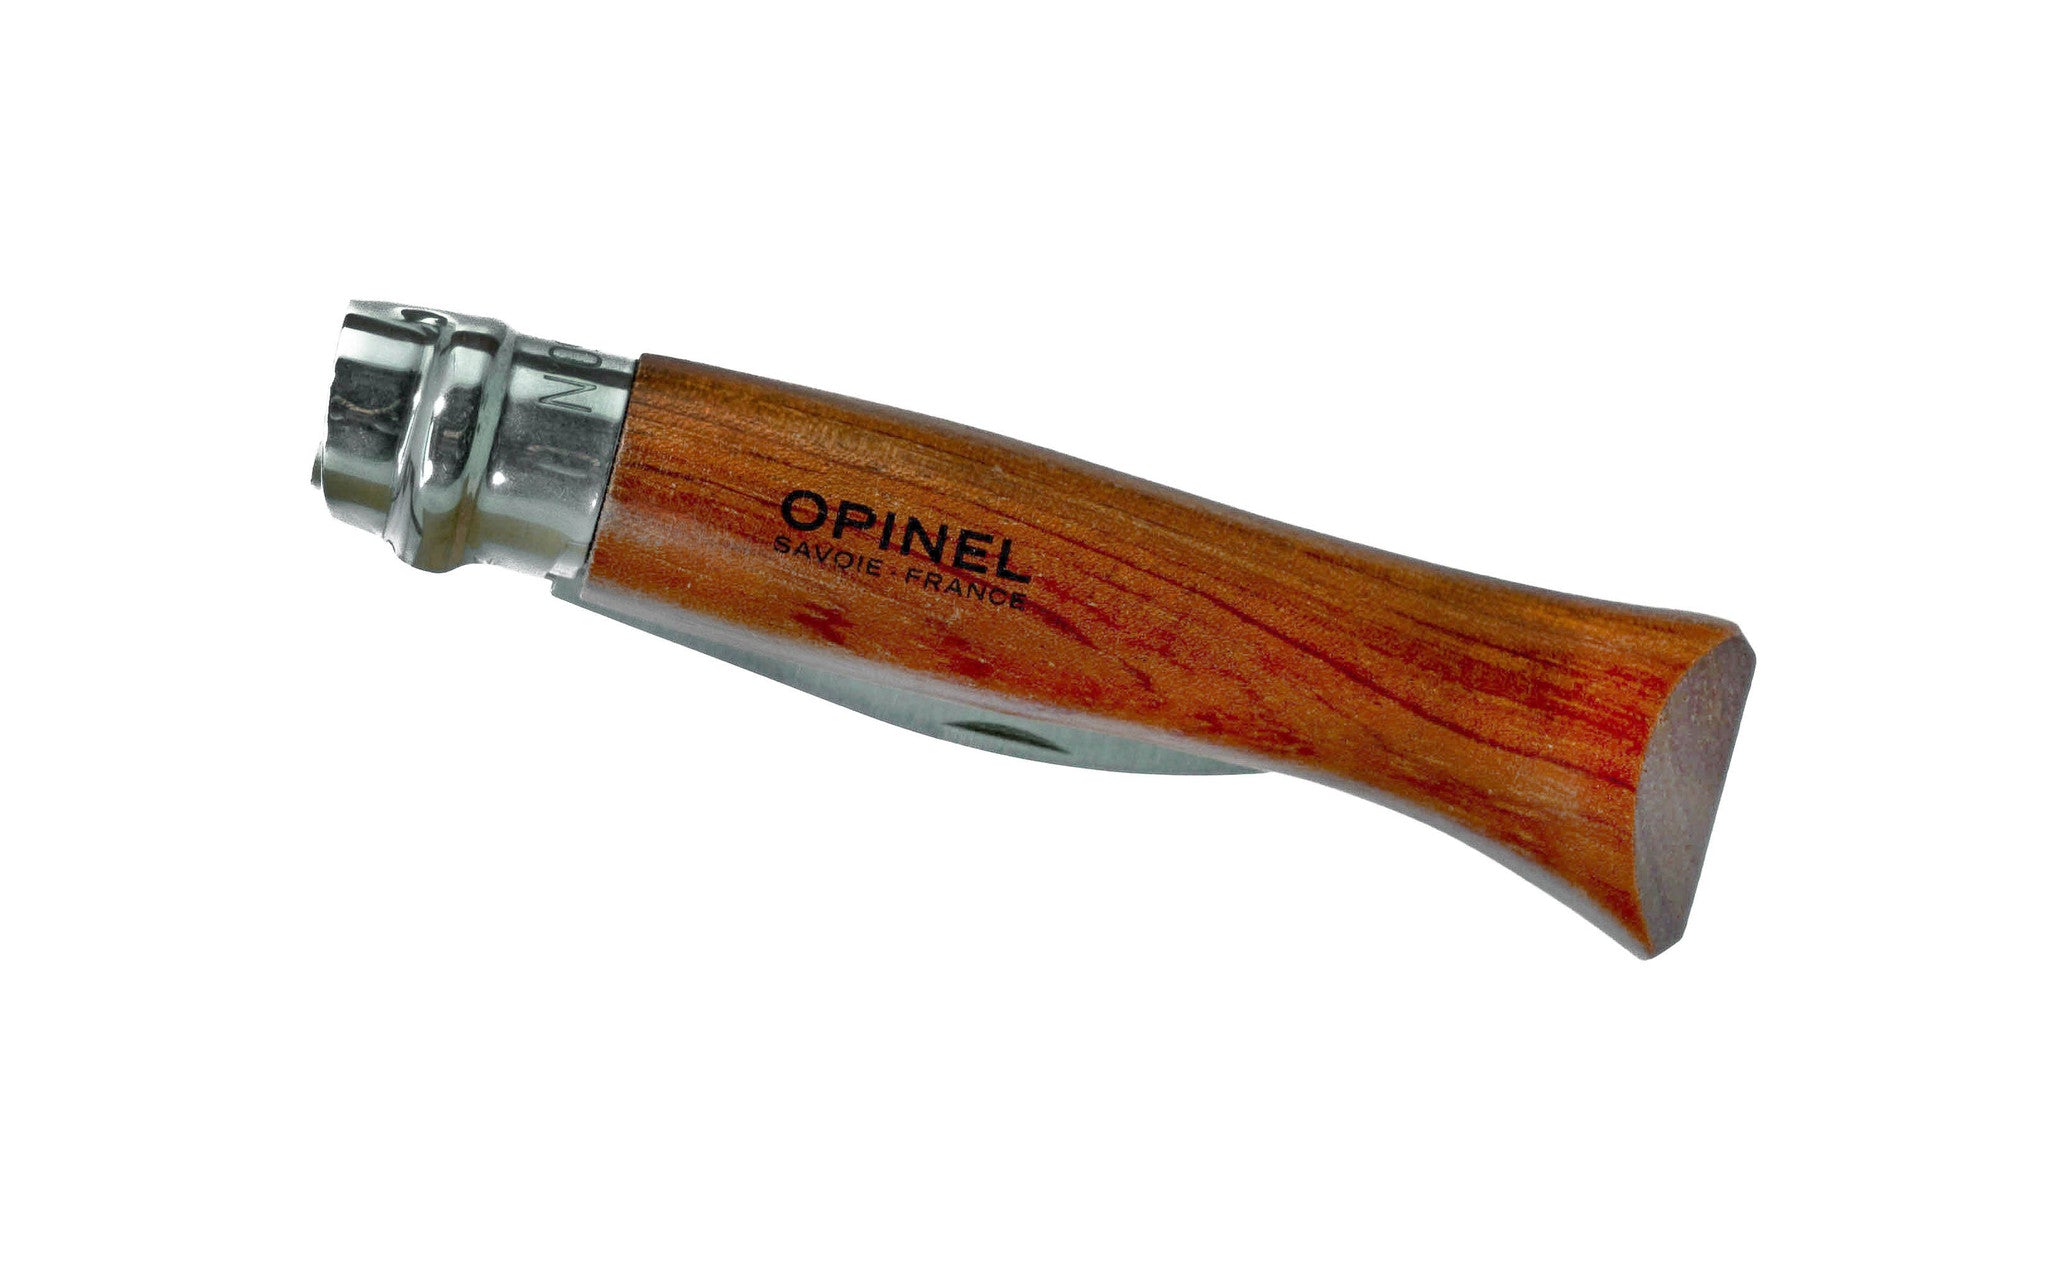 Opinel Stainless Steel Oyster Knife ~ Folded Position & Locked